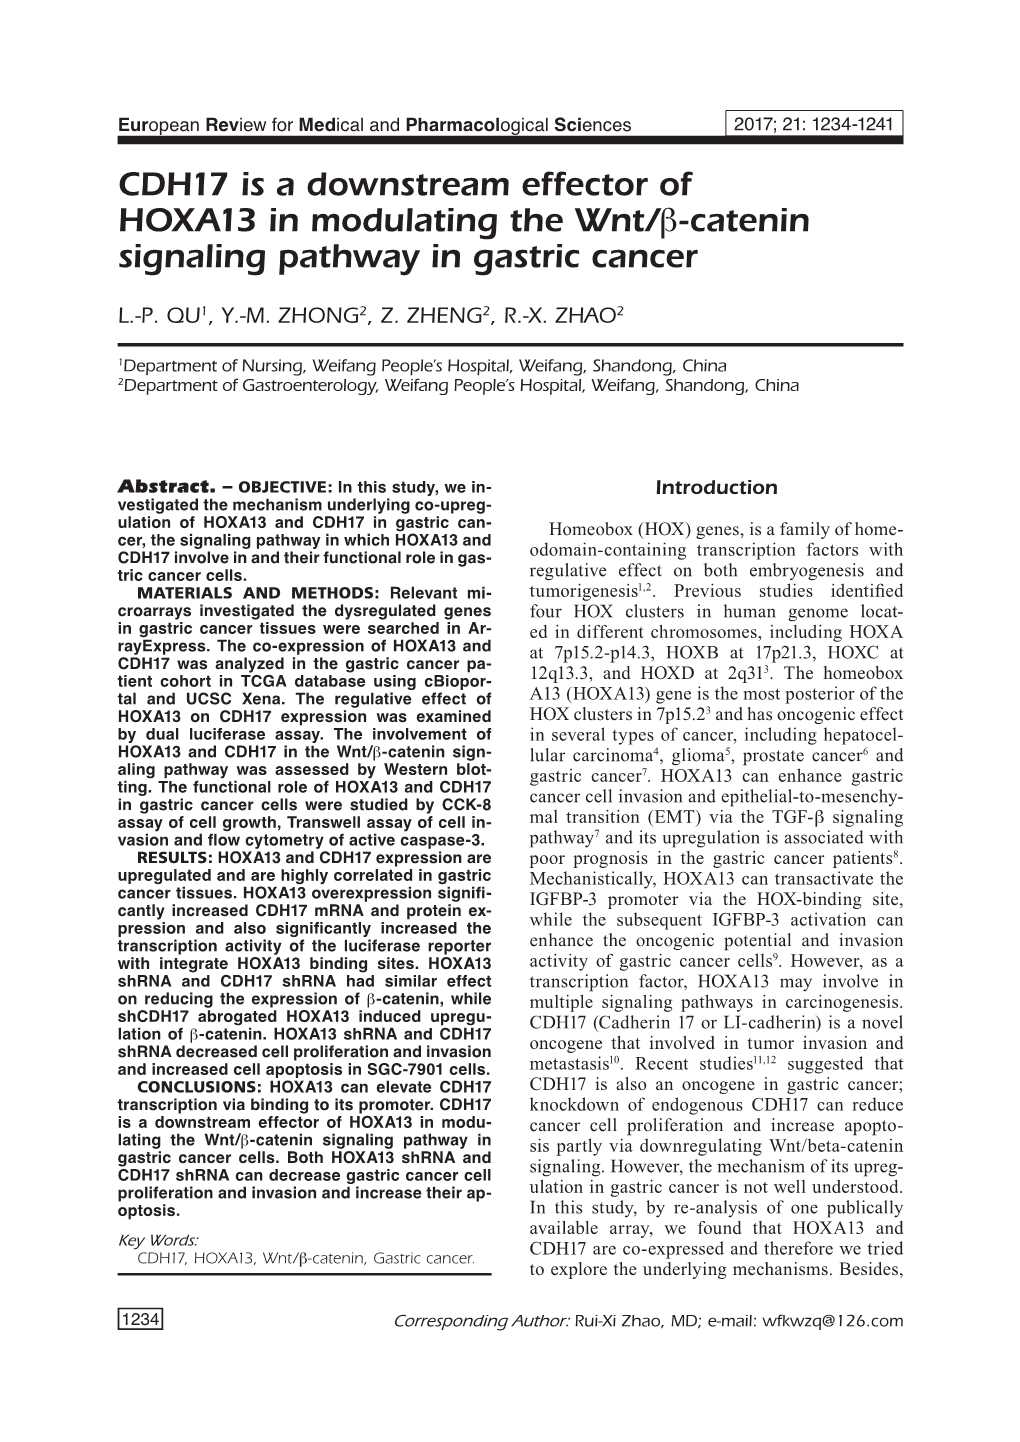 CDH17, HOXA13 and Wnt/B-Catenin in Gastric Cancer